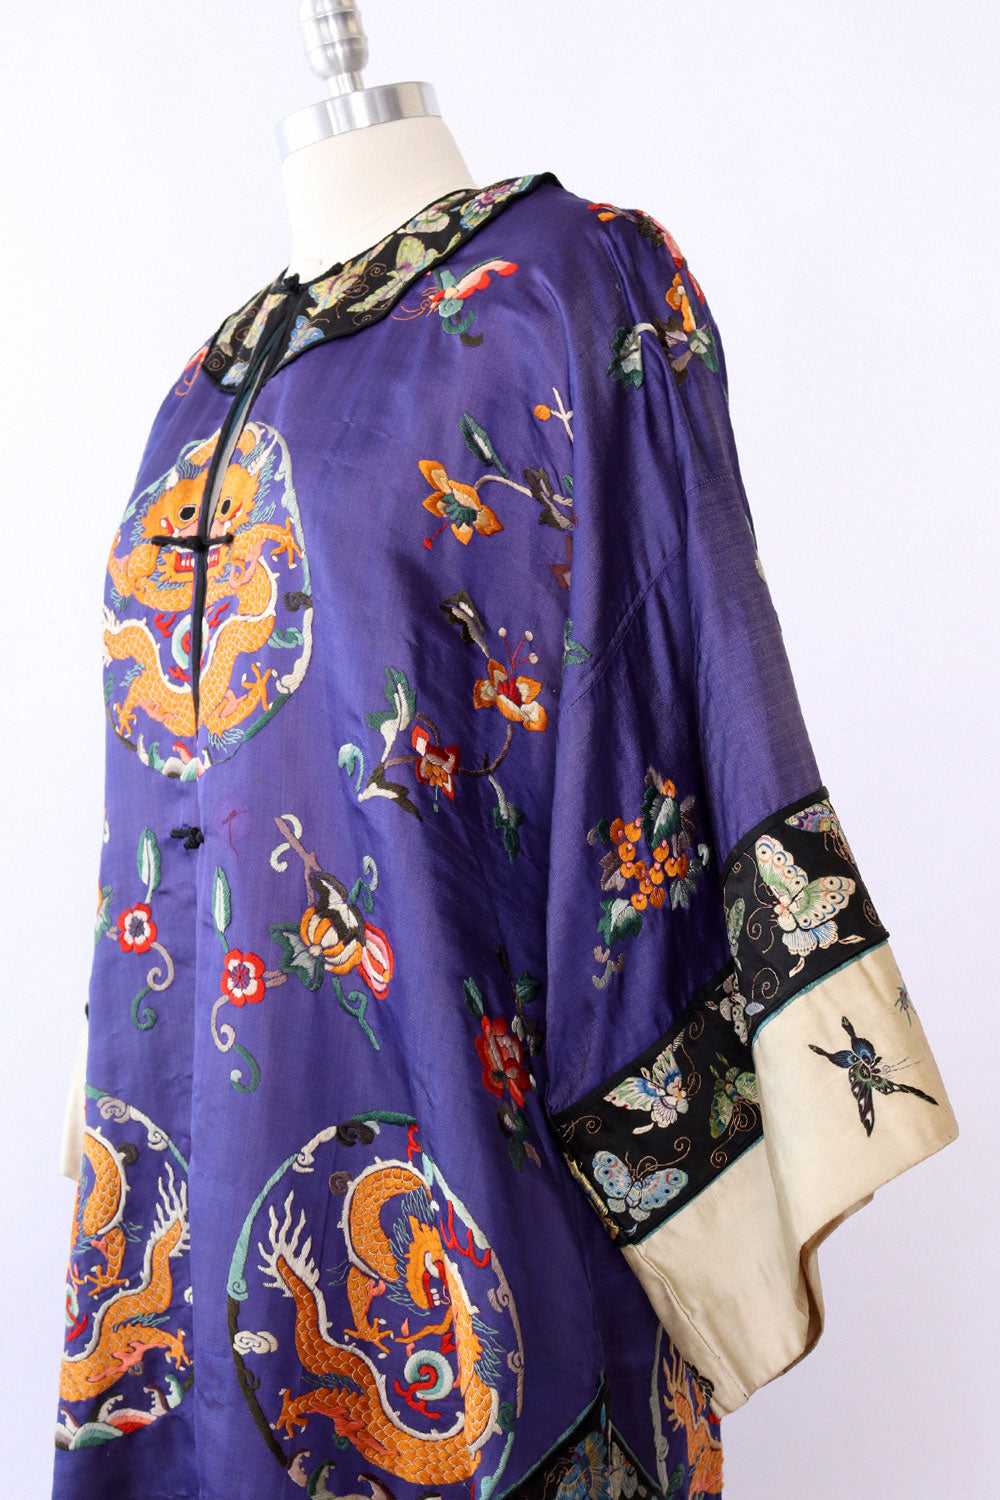 Qing Dynasty Silk Embroidered Robe - image 5